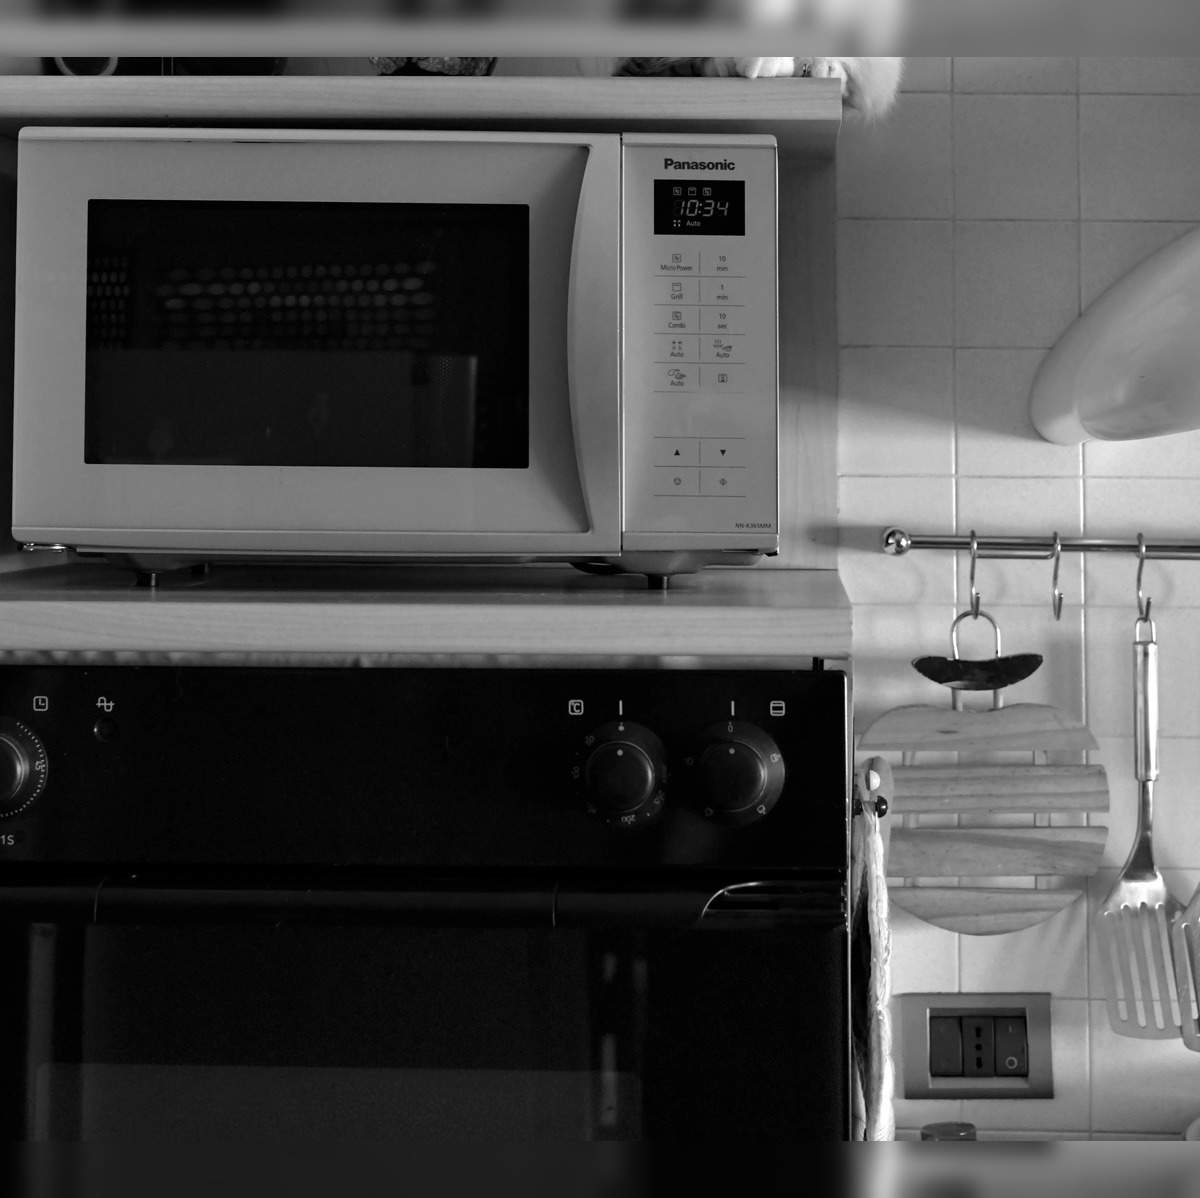 Touch panel microwaves: Top 8 models for your smart kitchen